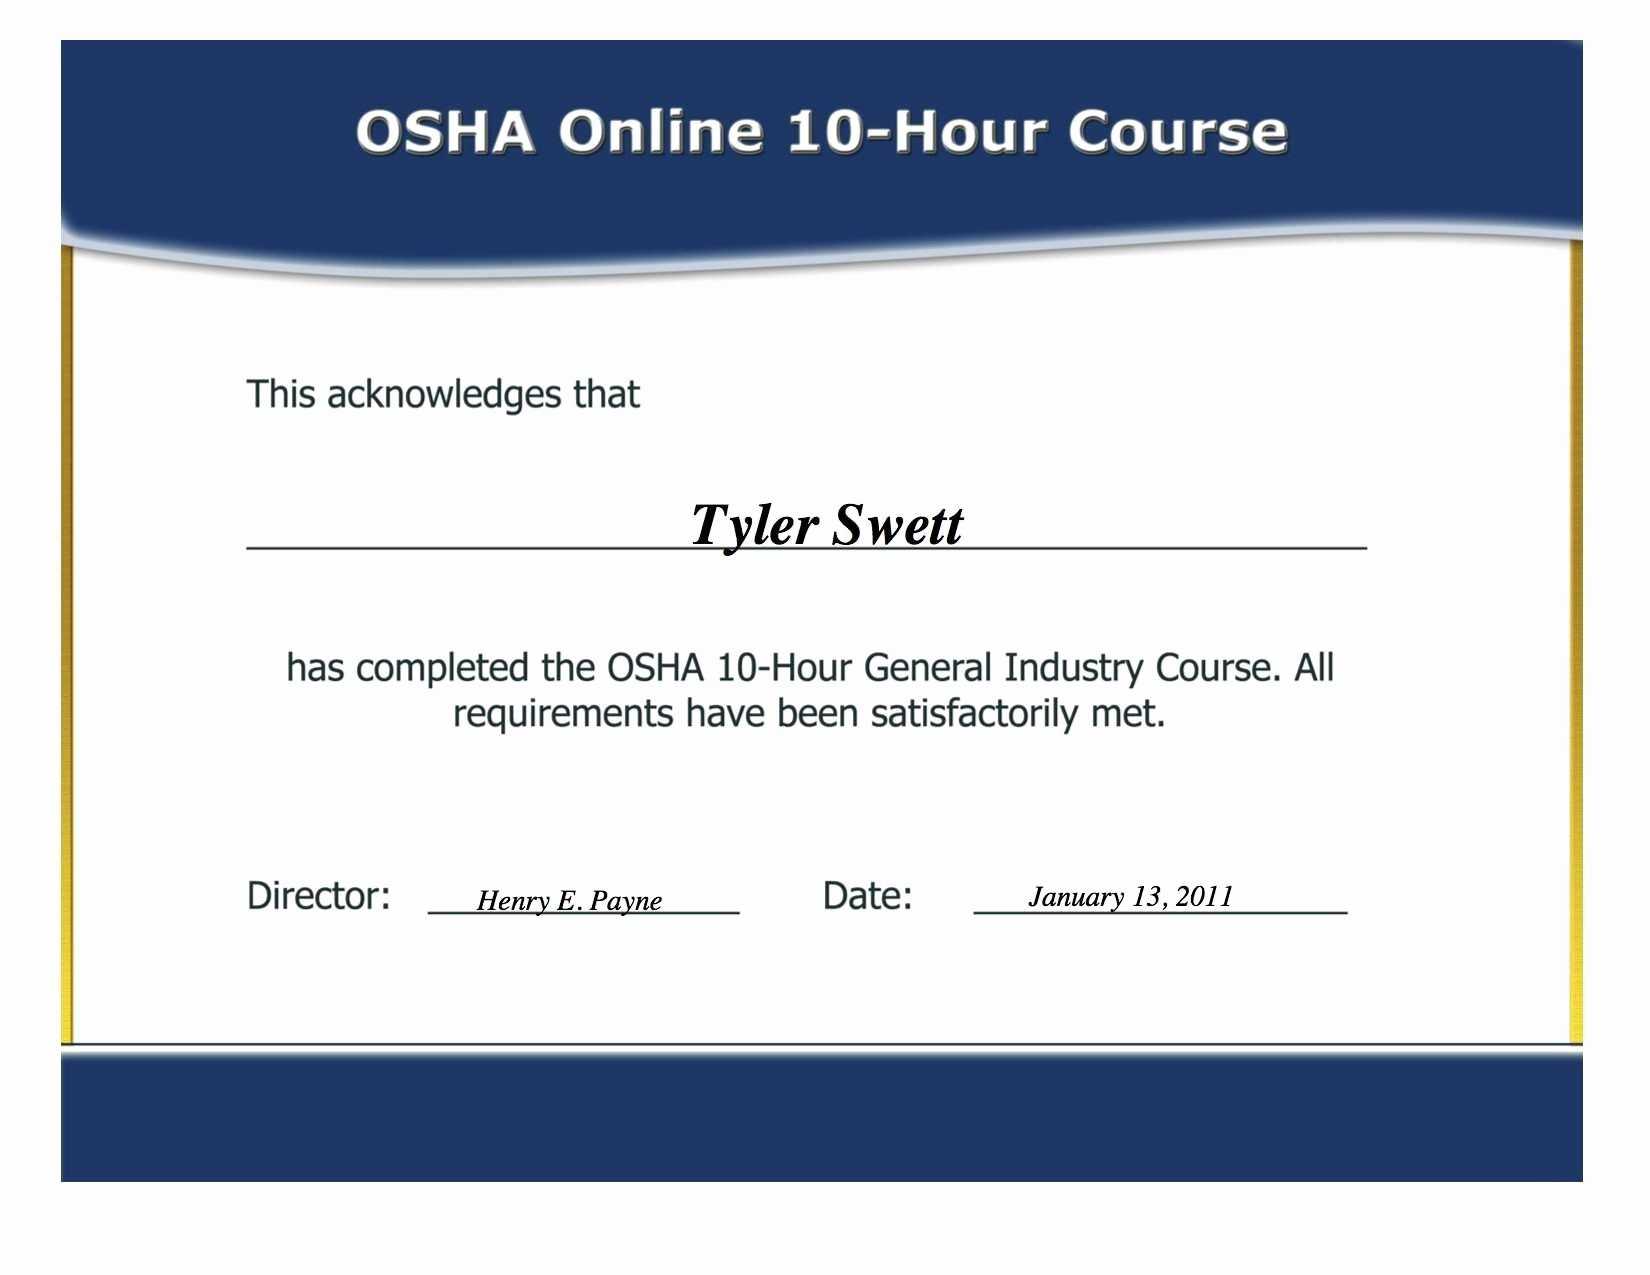 12 Certificate Of Training Template Free | Business Letter Throughout Osha 10 Card Template